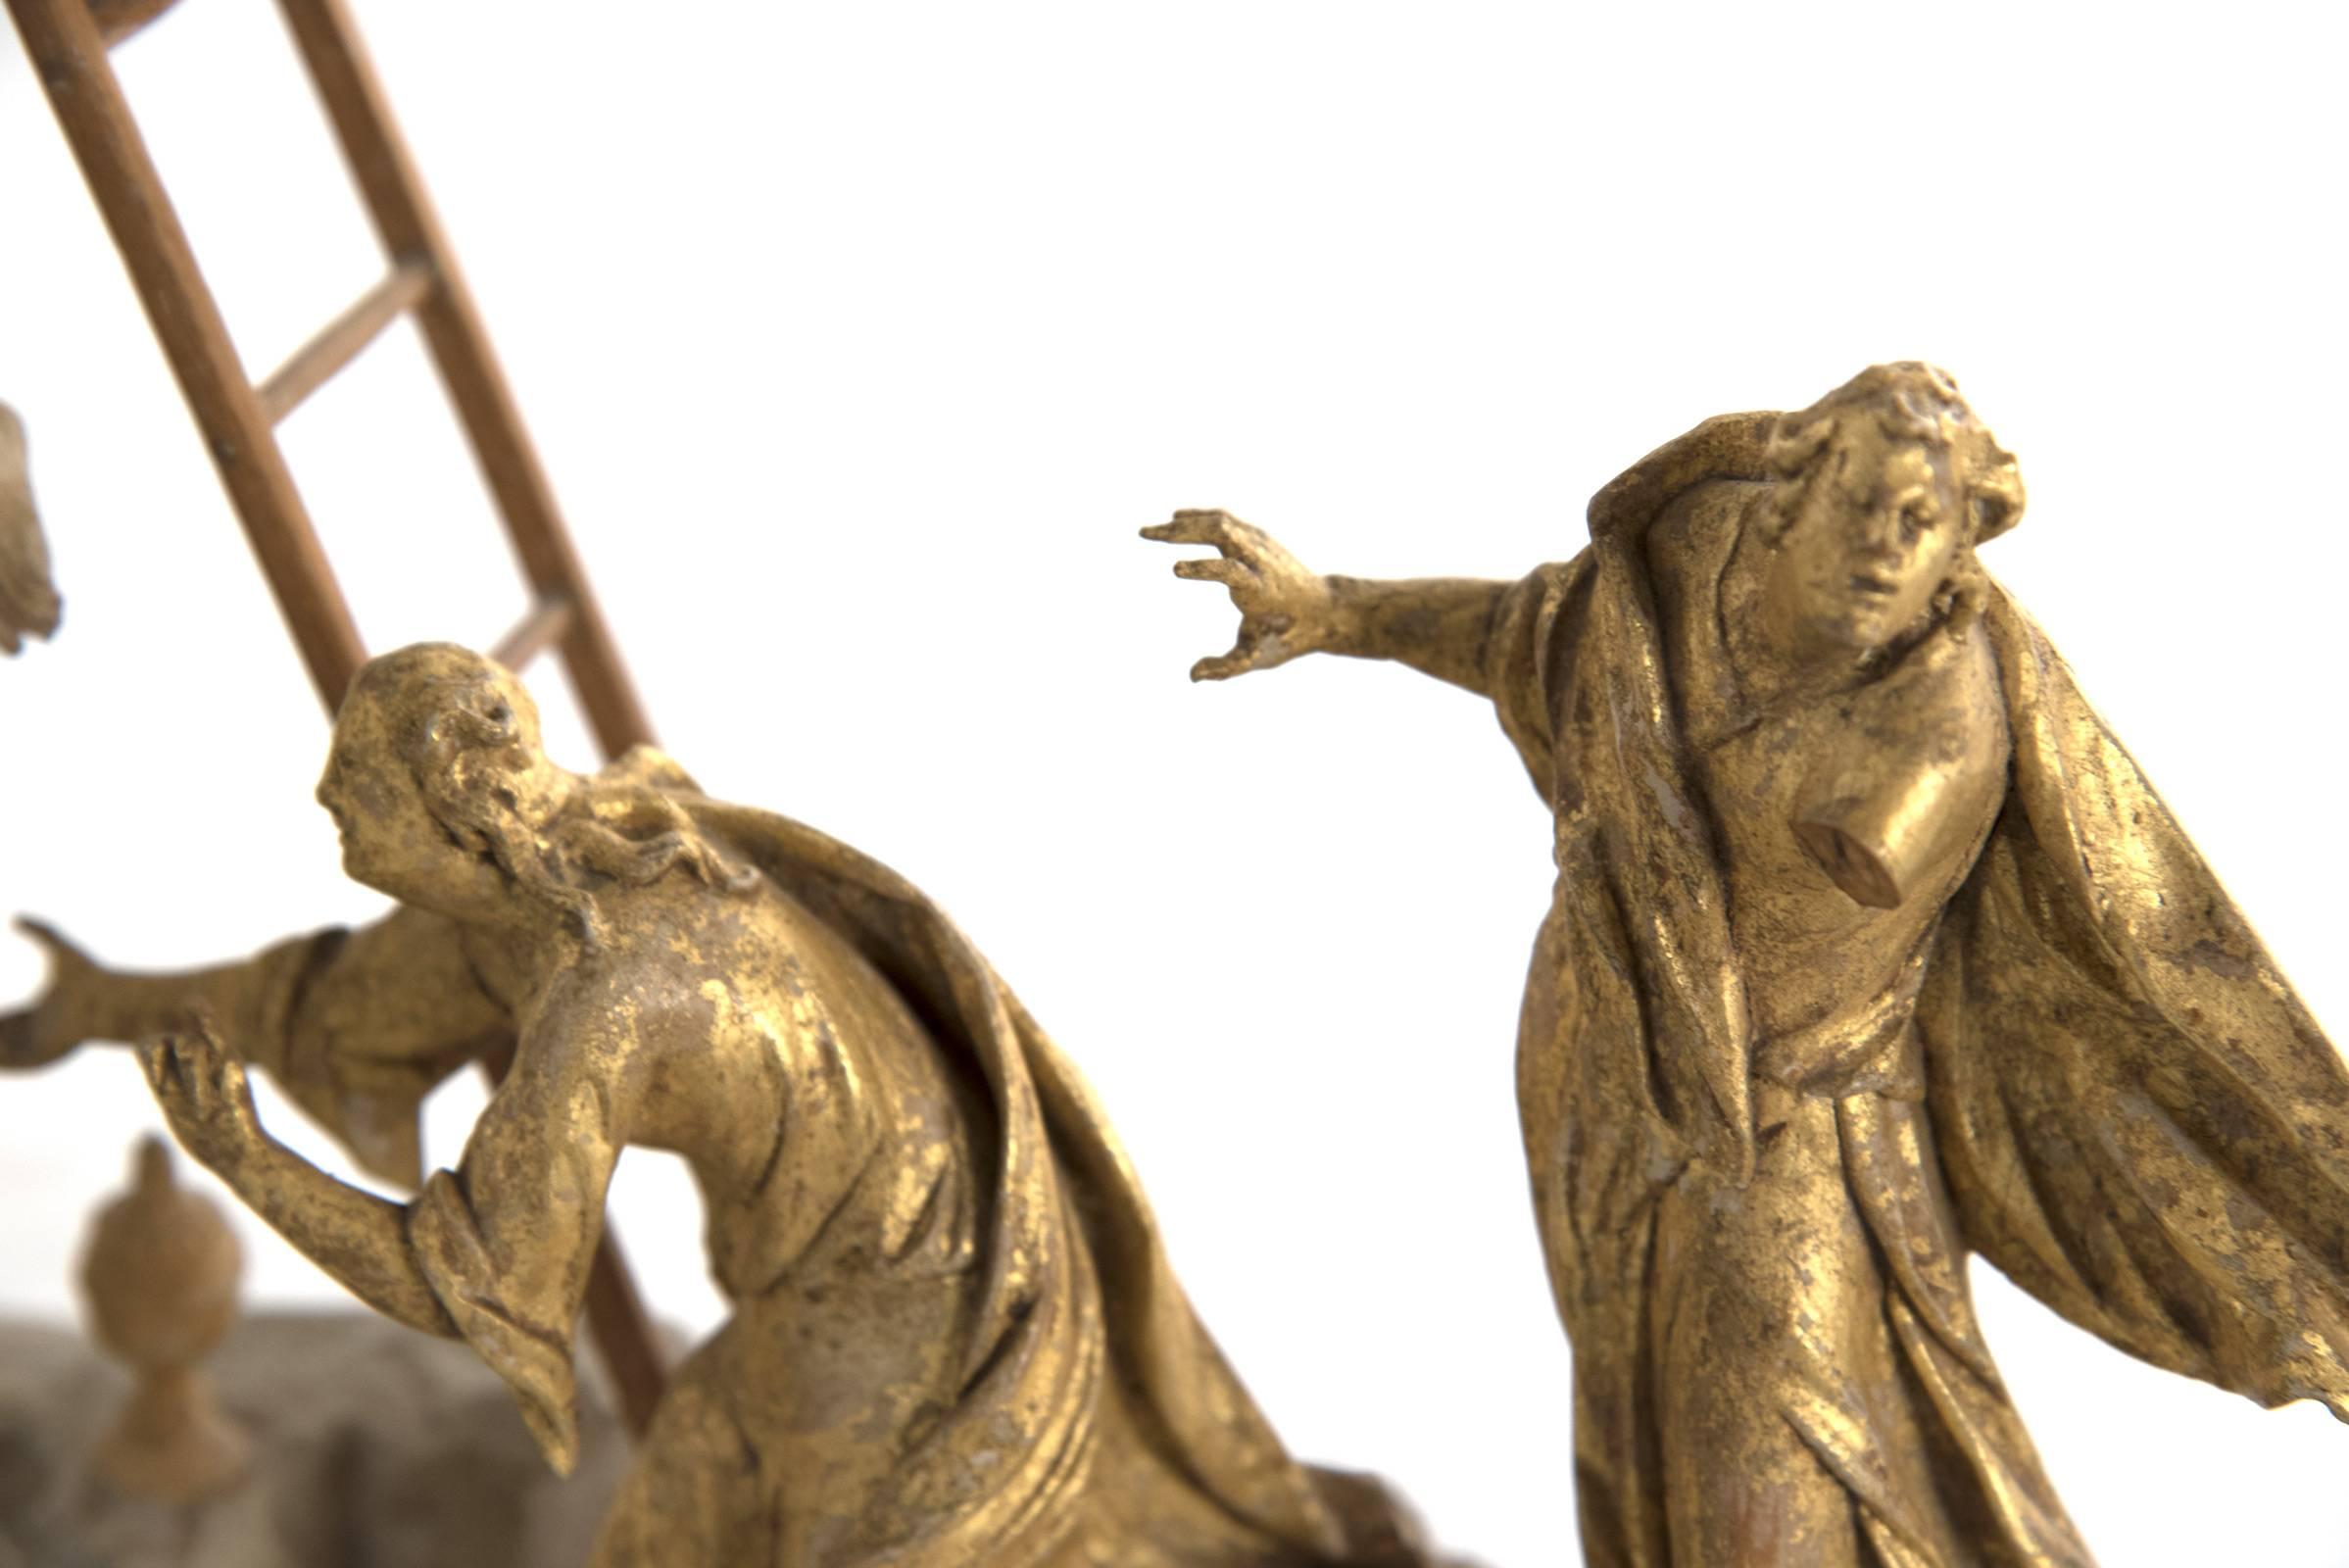 American Set of Wood and Gold Leaf Crucifixion Sculptures